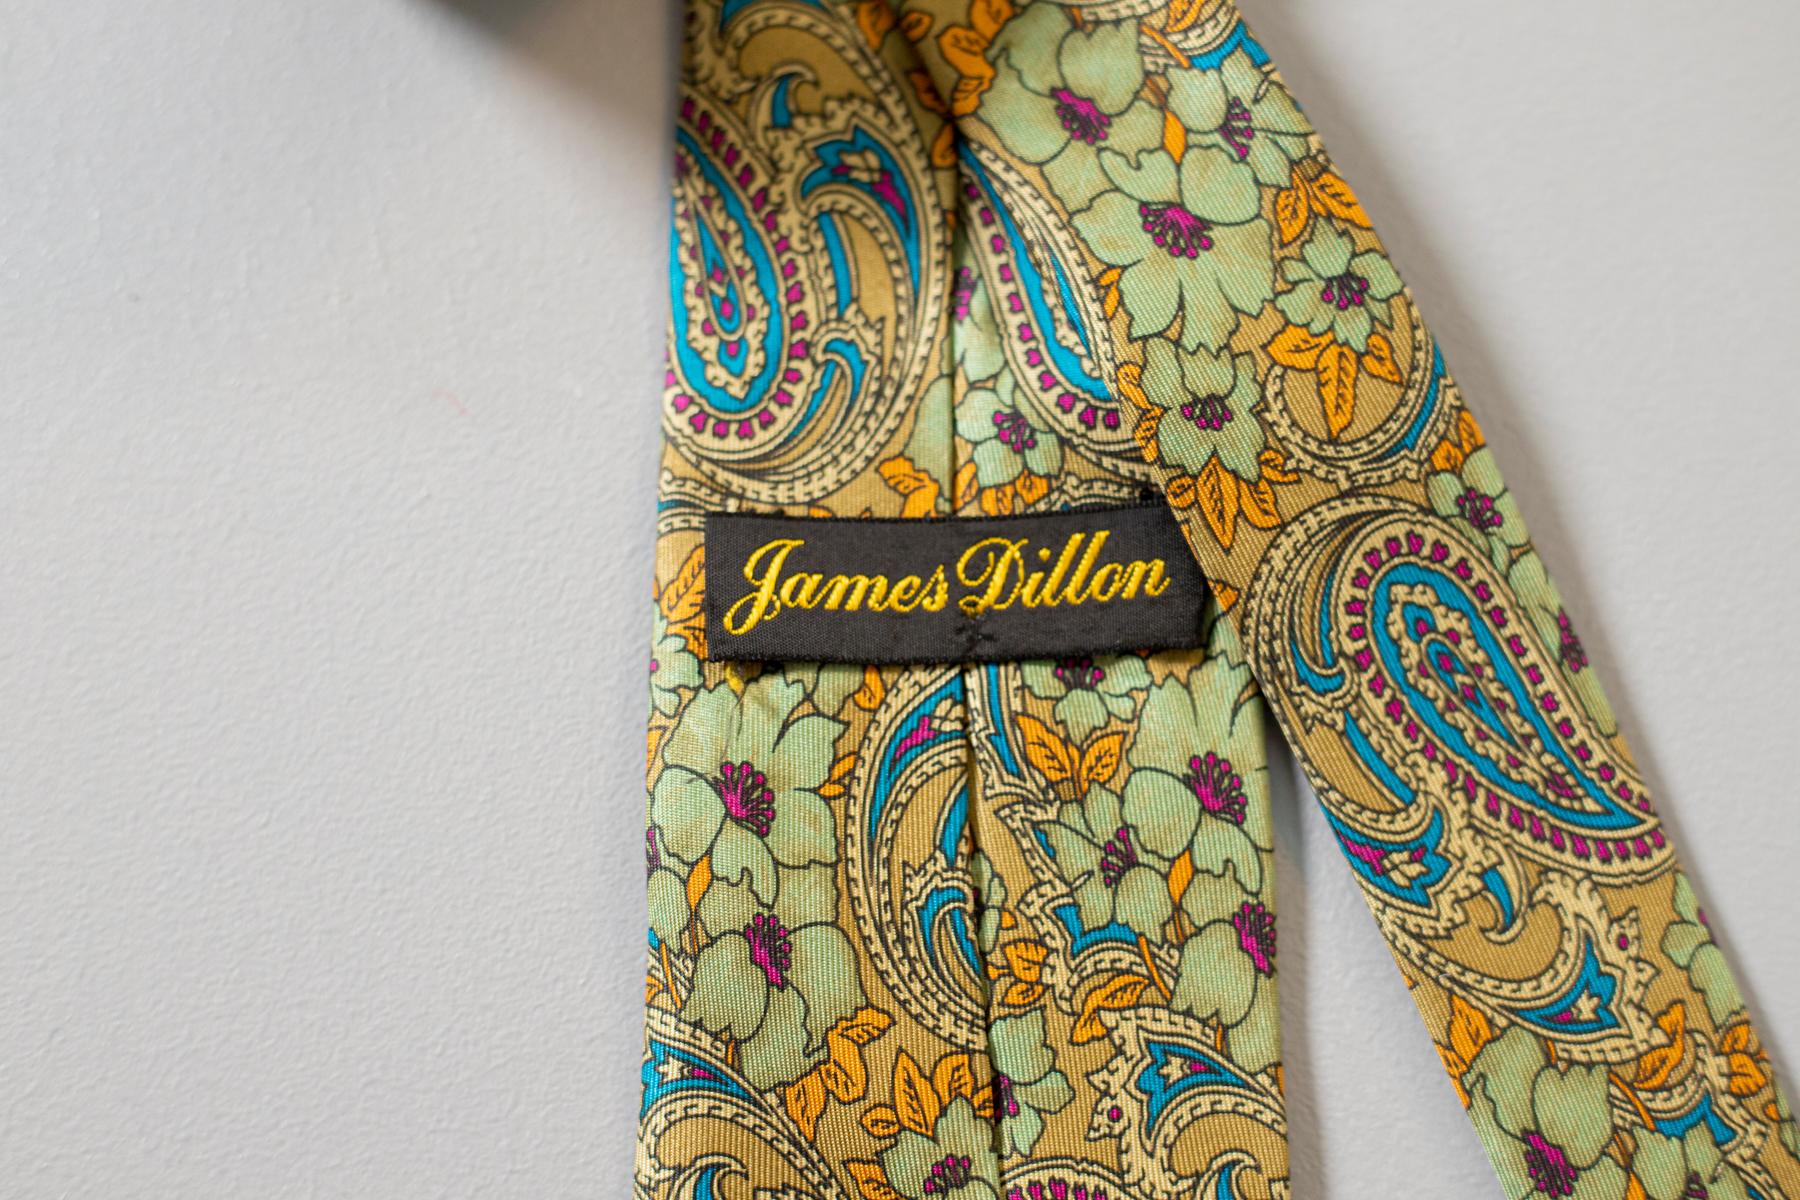 Unique and unusual, James Dillon styled this tie thinking about the most eccentric people. Made in all silk, this green tie is decorated with a paisley motif and some flowers. It is the ideal choice for everyone who wants to feel like a dandy for